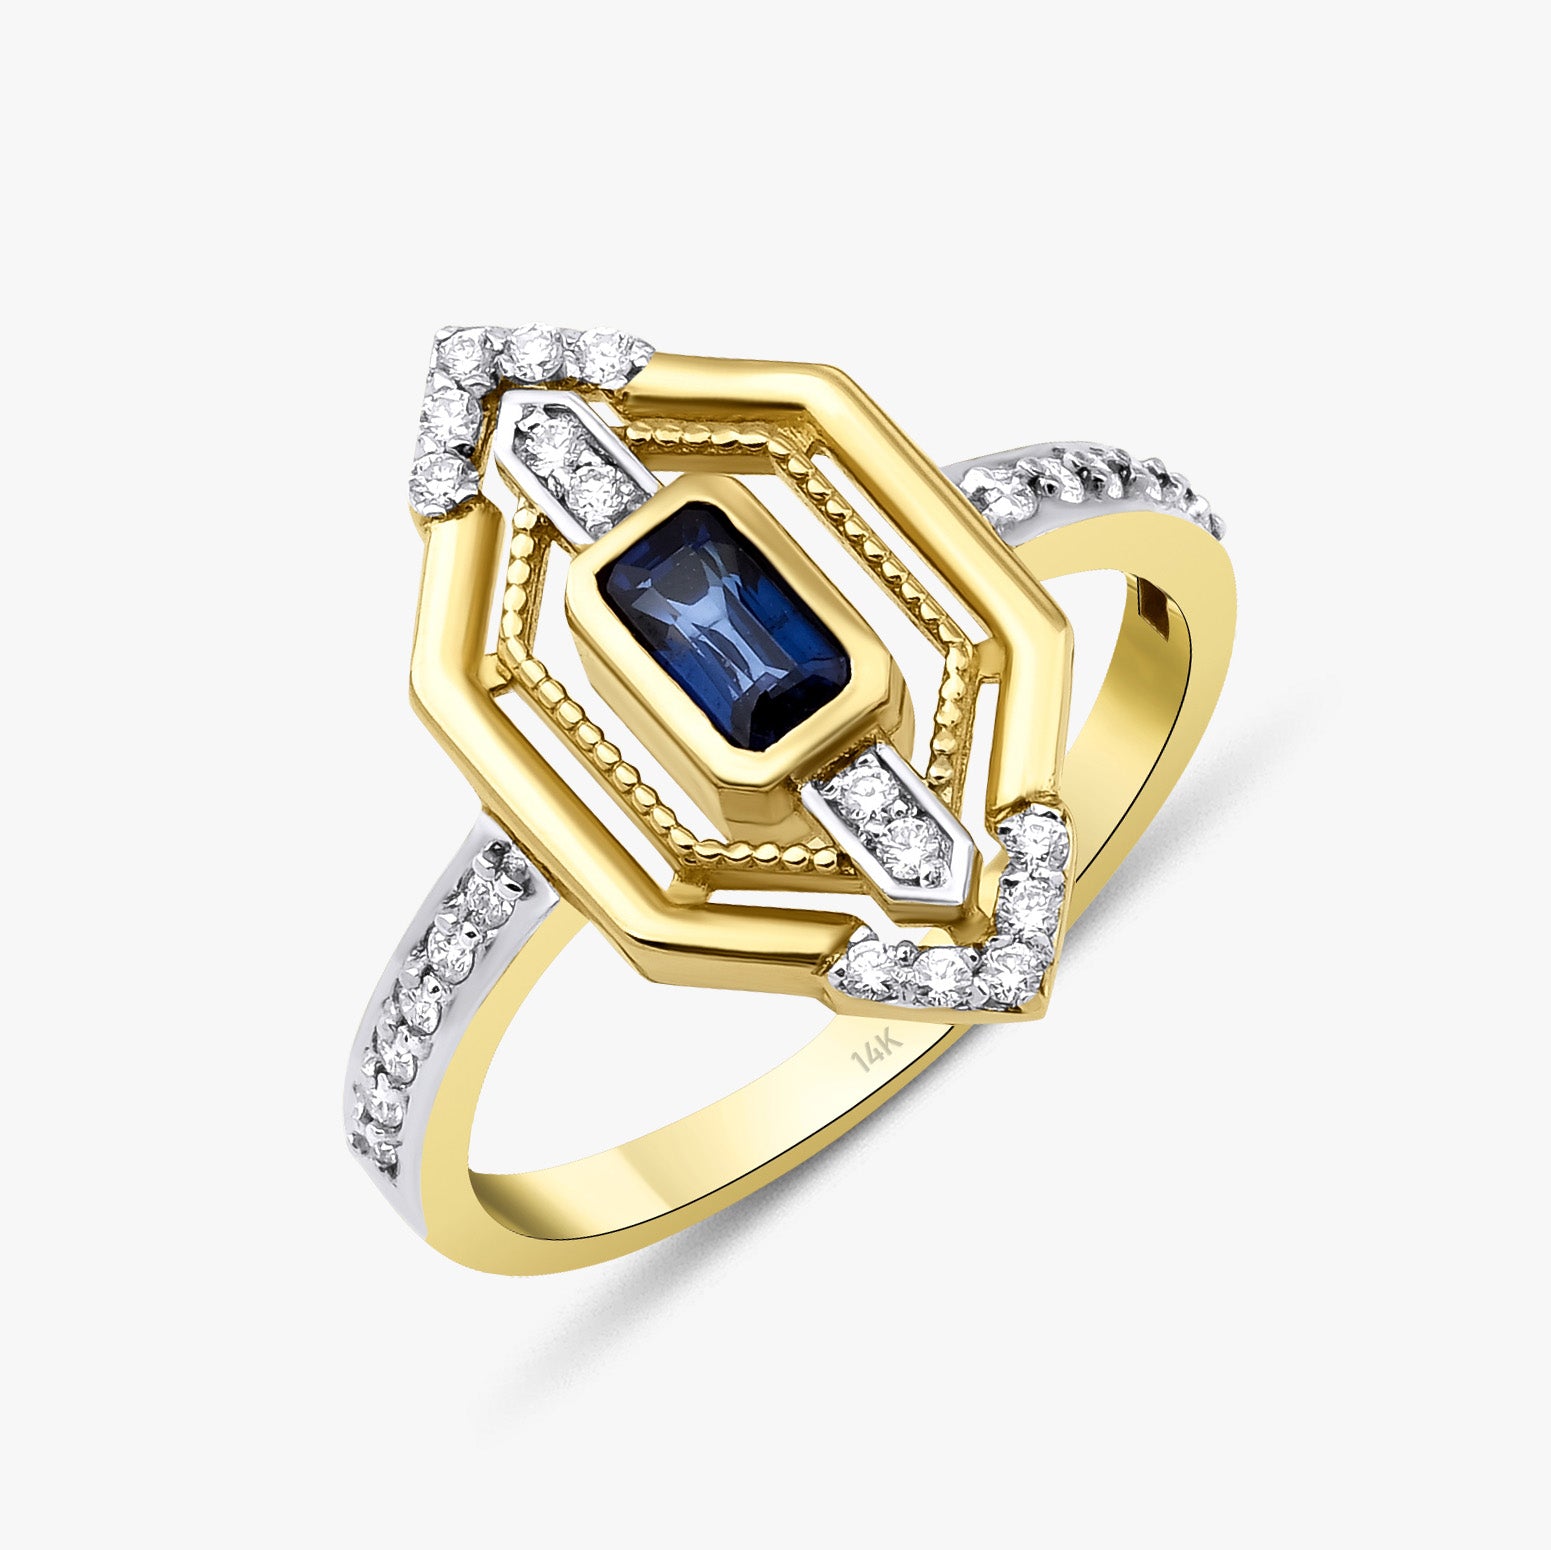 Emerald Cut Sapphire and Diamond Ring in 14K Gold